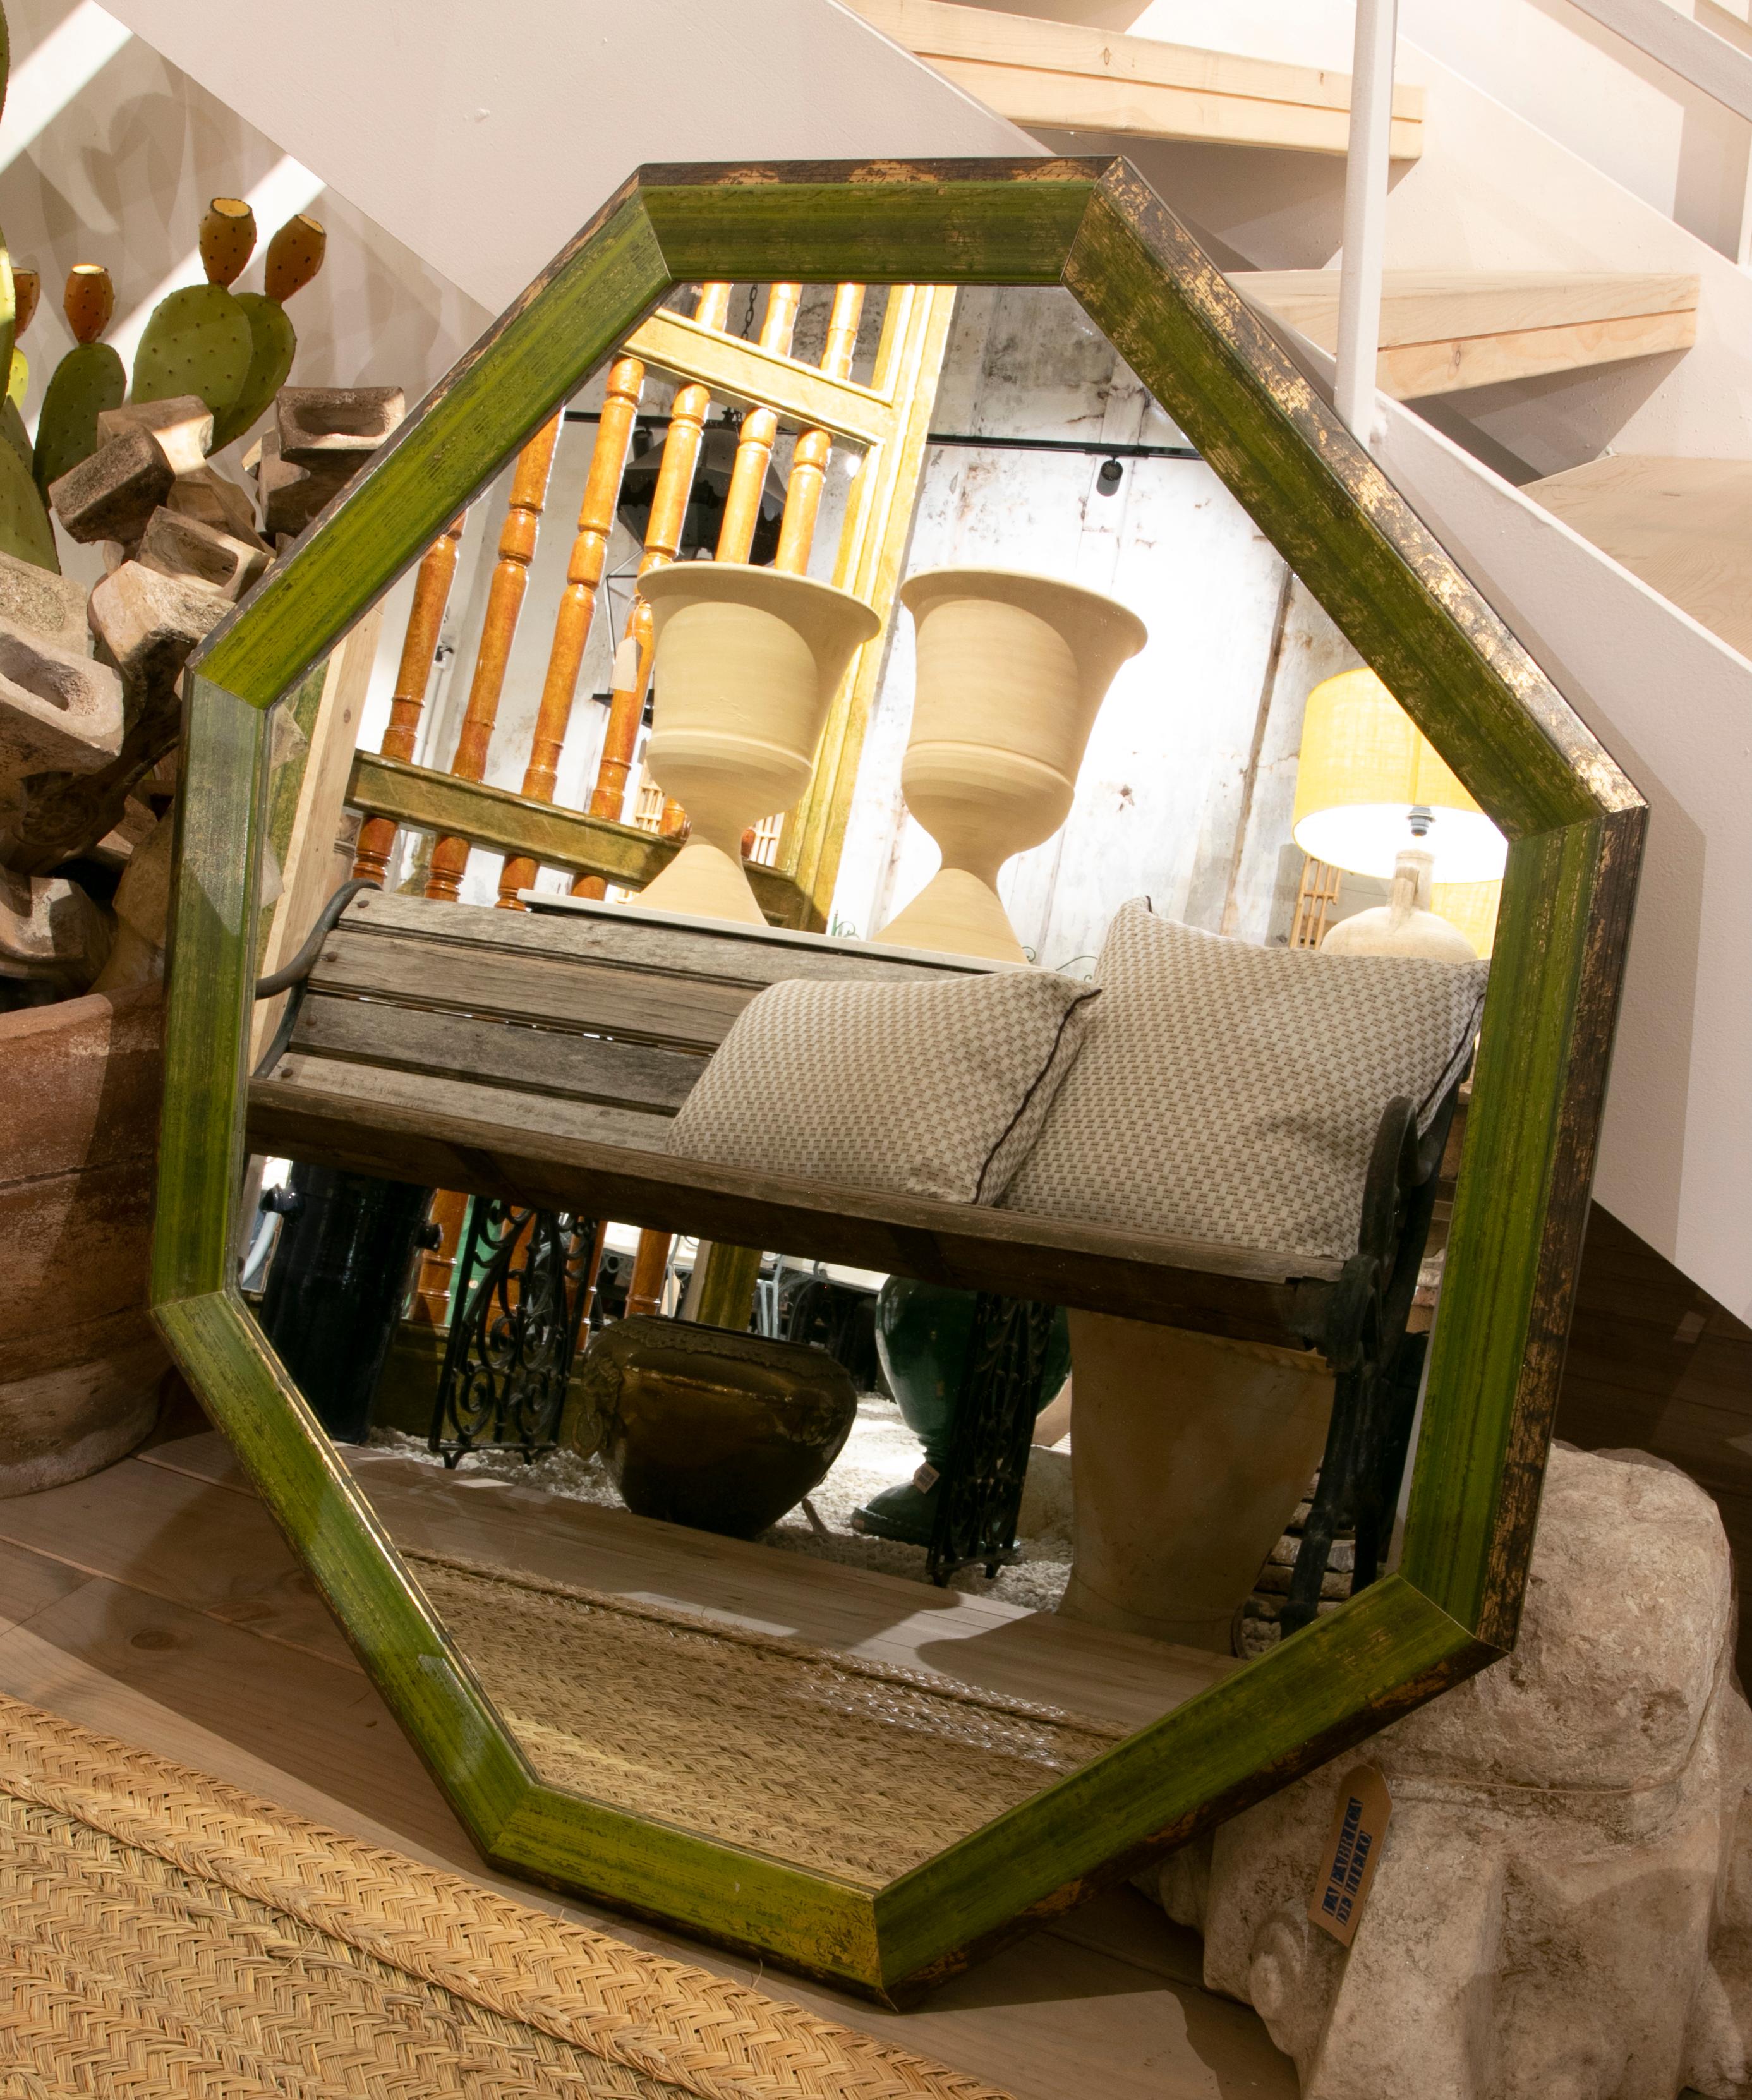 Wooden octagonal wall mirror painted in green.
 